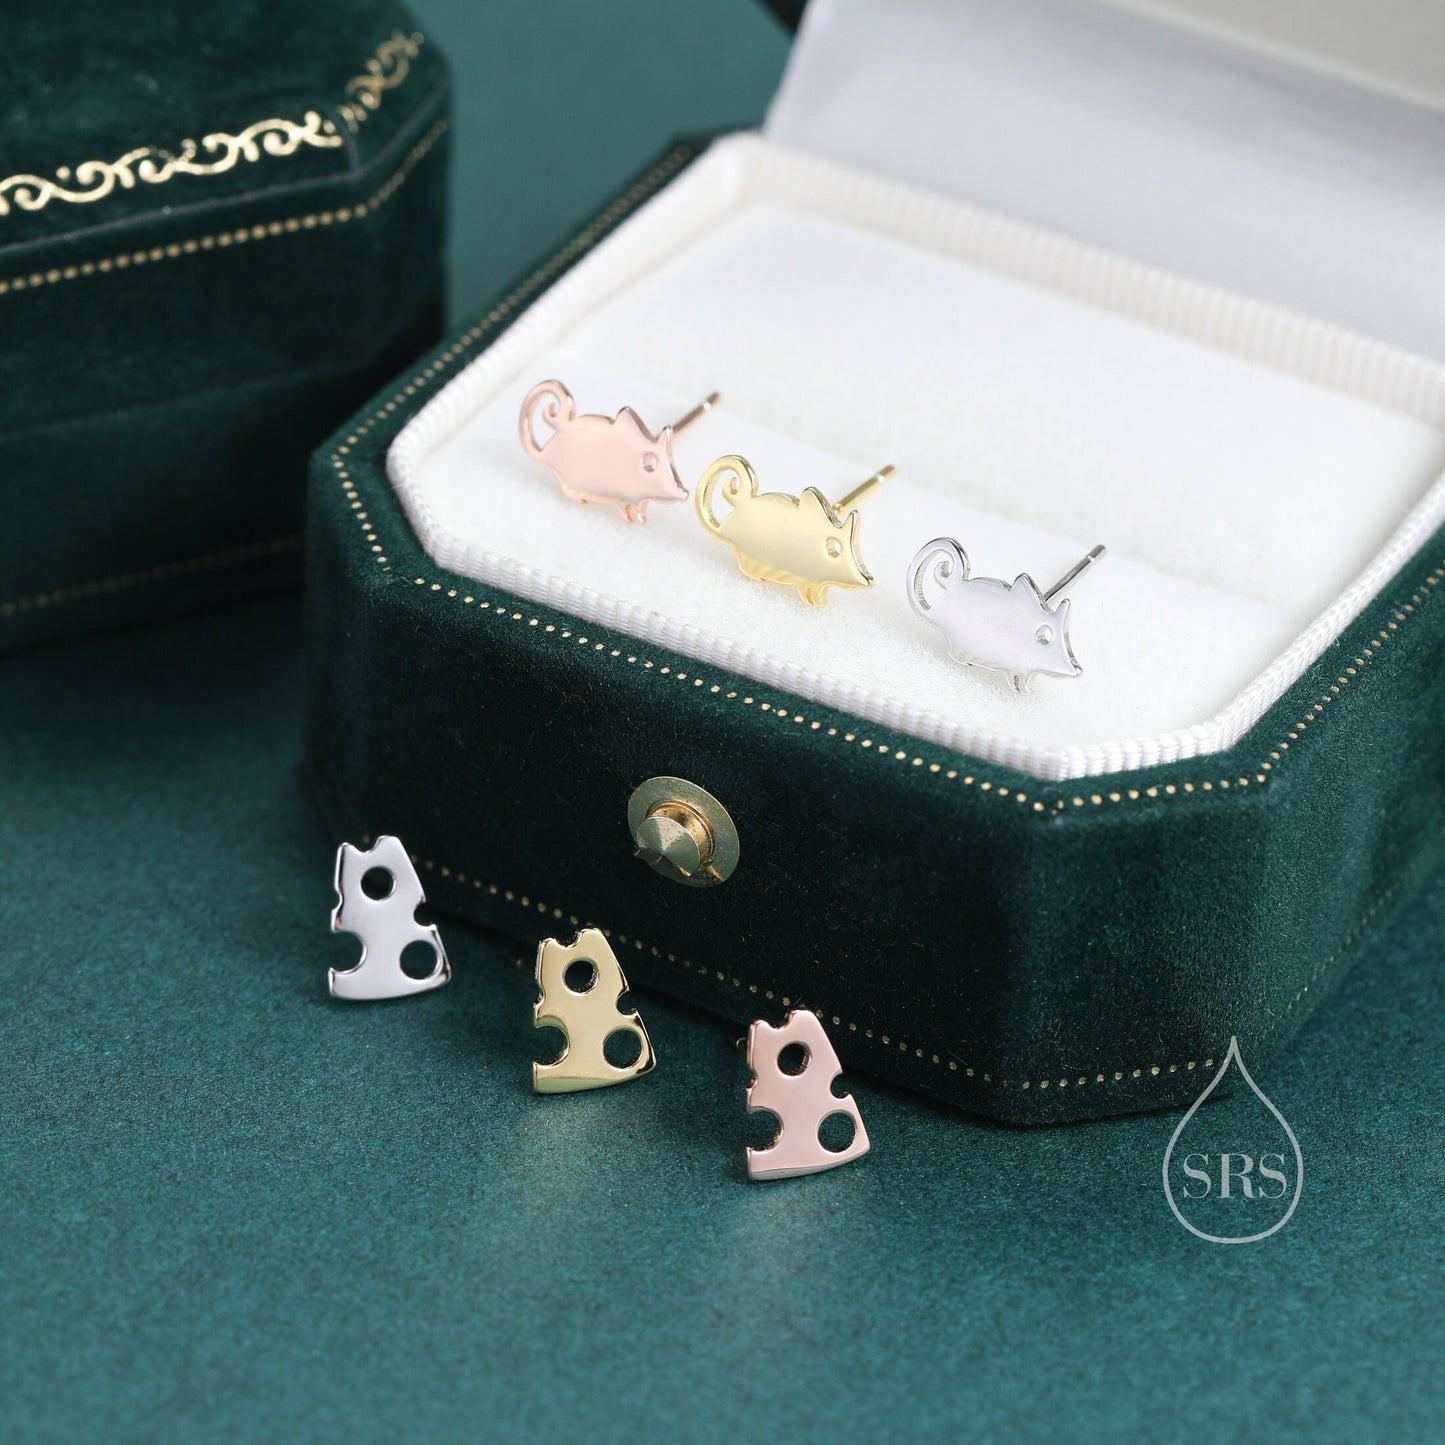 Mouse and Cheese Stud Earrings in Sterling Silver,  Cute Fun Quirky Animal Jewellery, Animal Lover, Nature Inspired